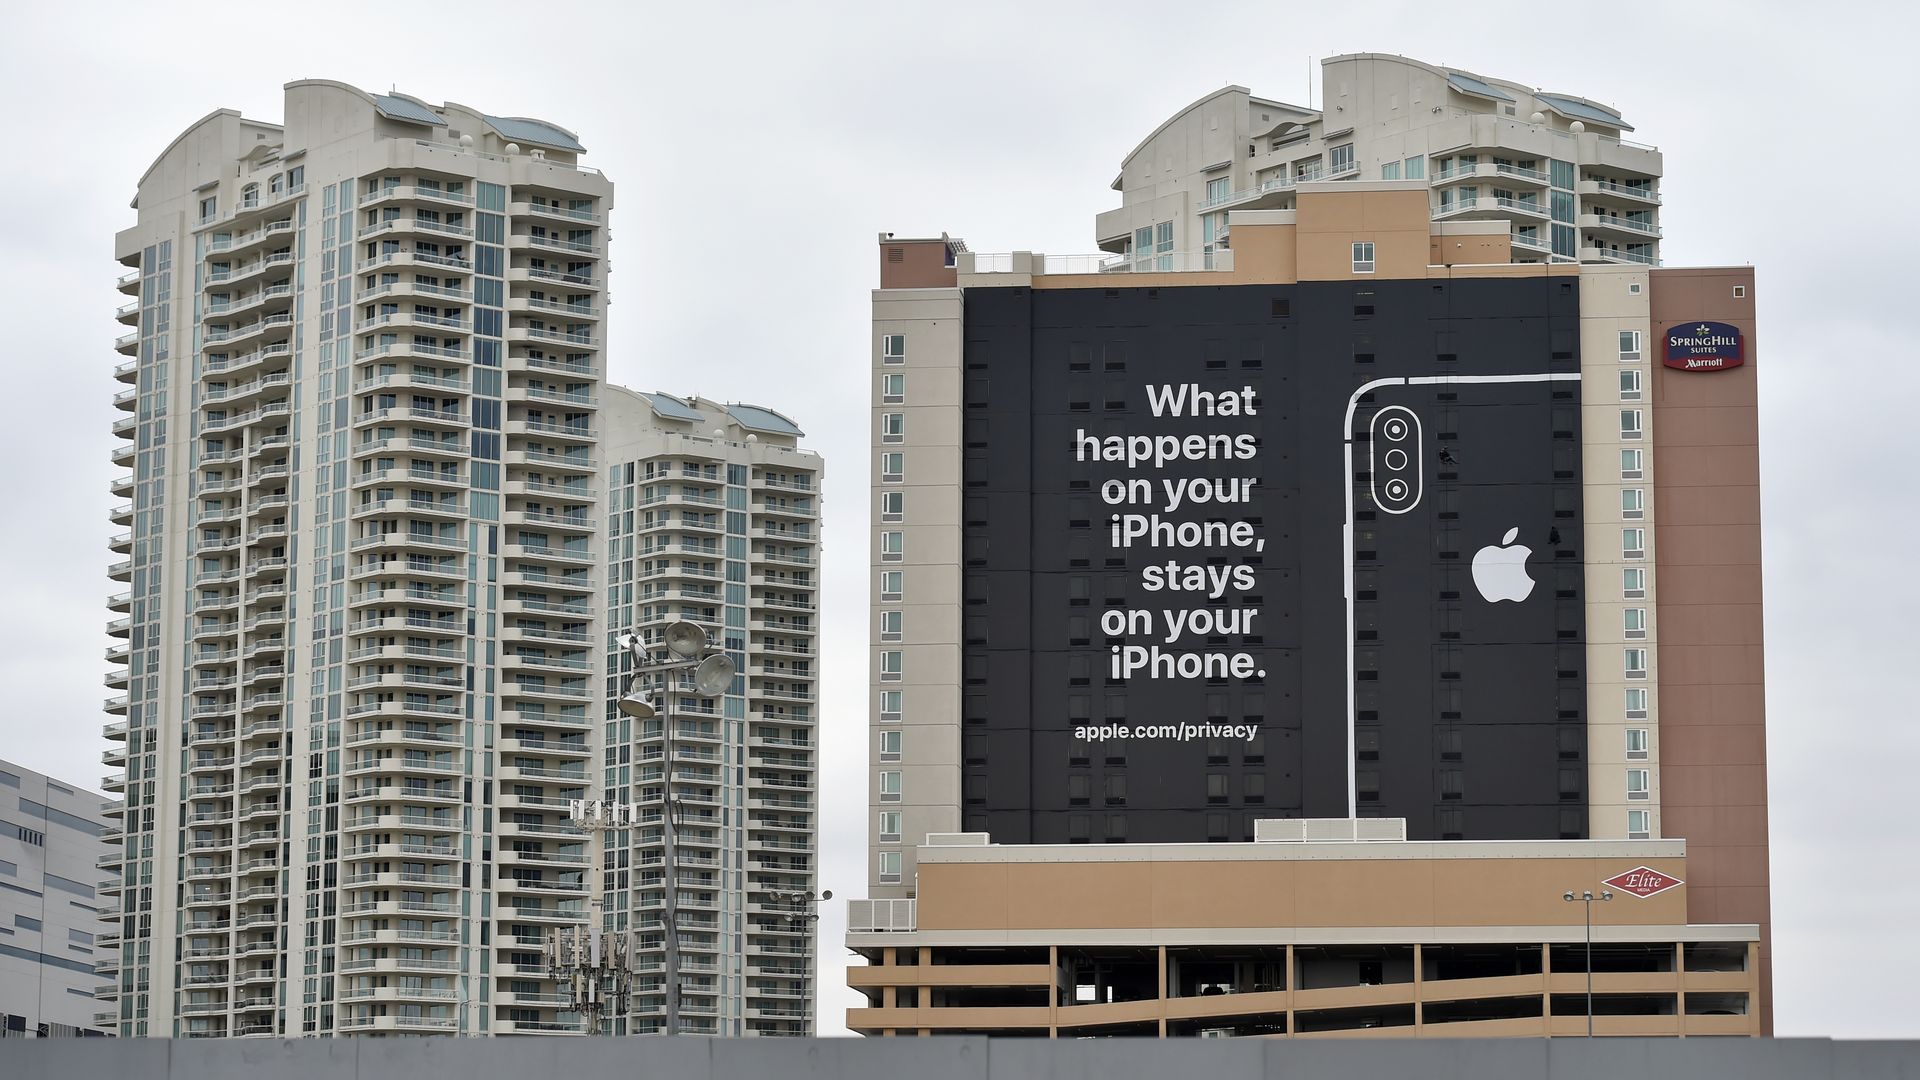 Photo of Apple ad in Las Vegas for CES reading "What happens on your iPhone stays on your iPhone"